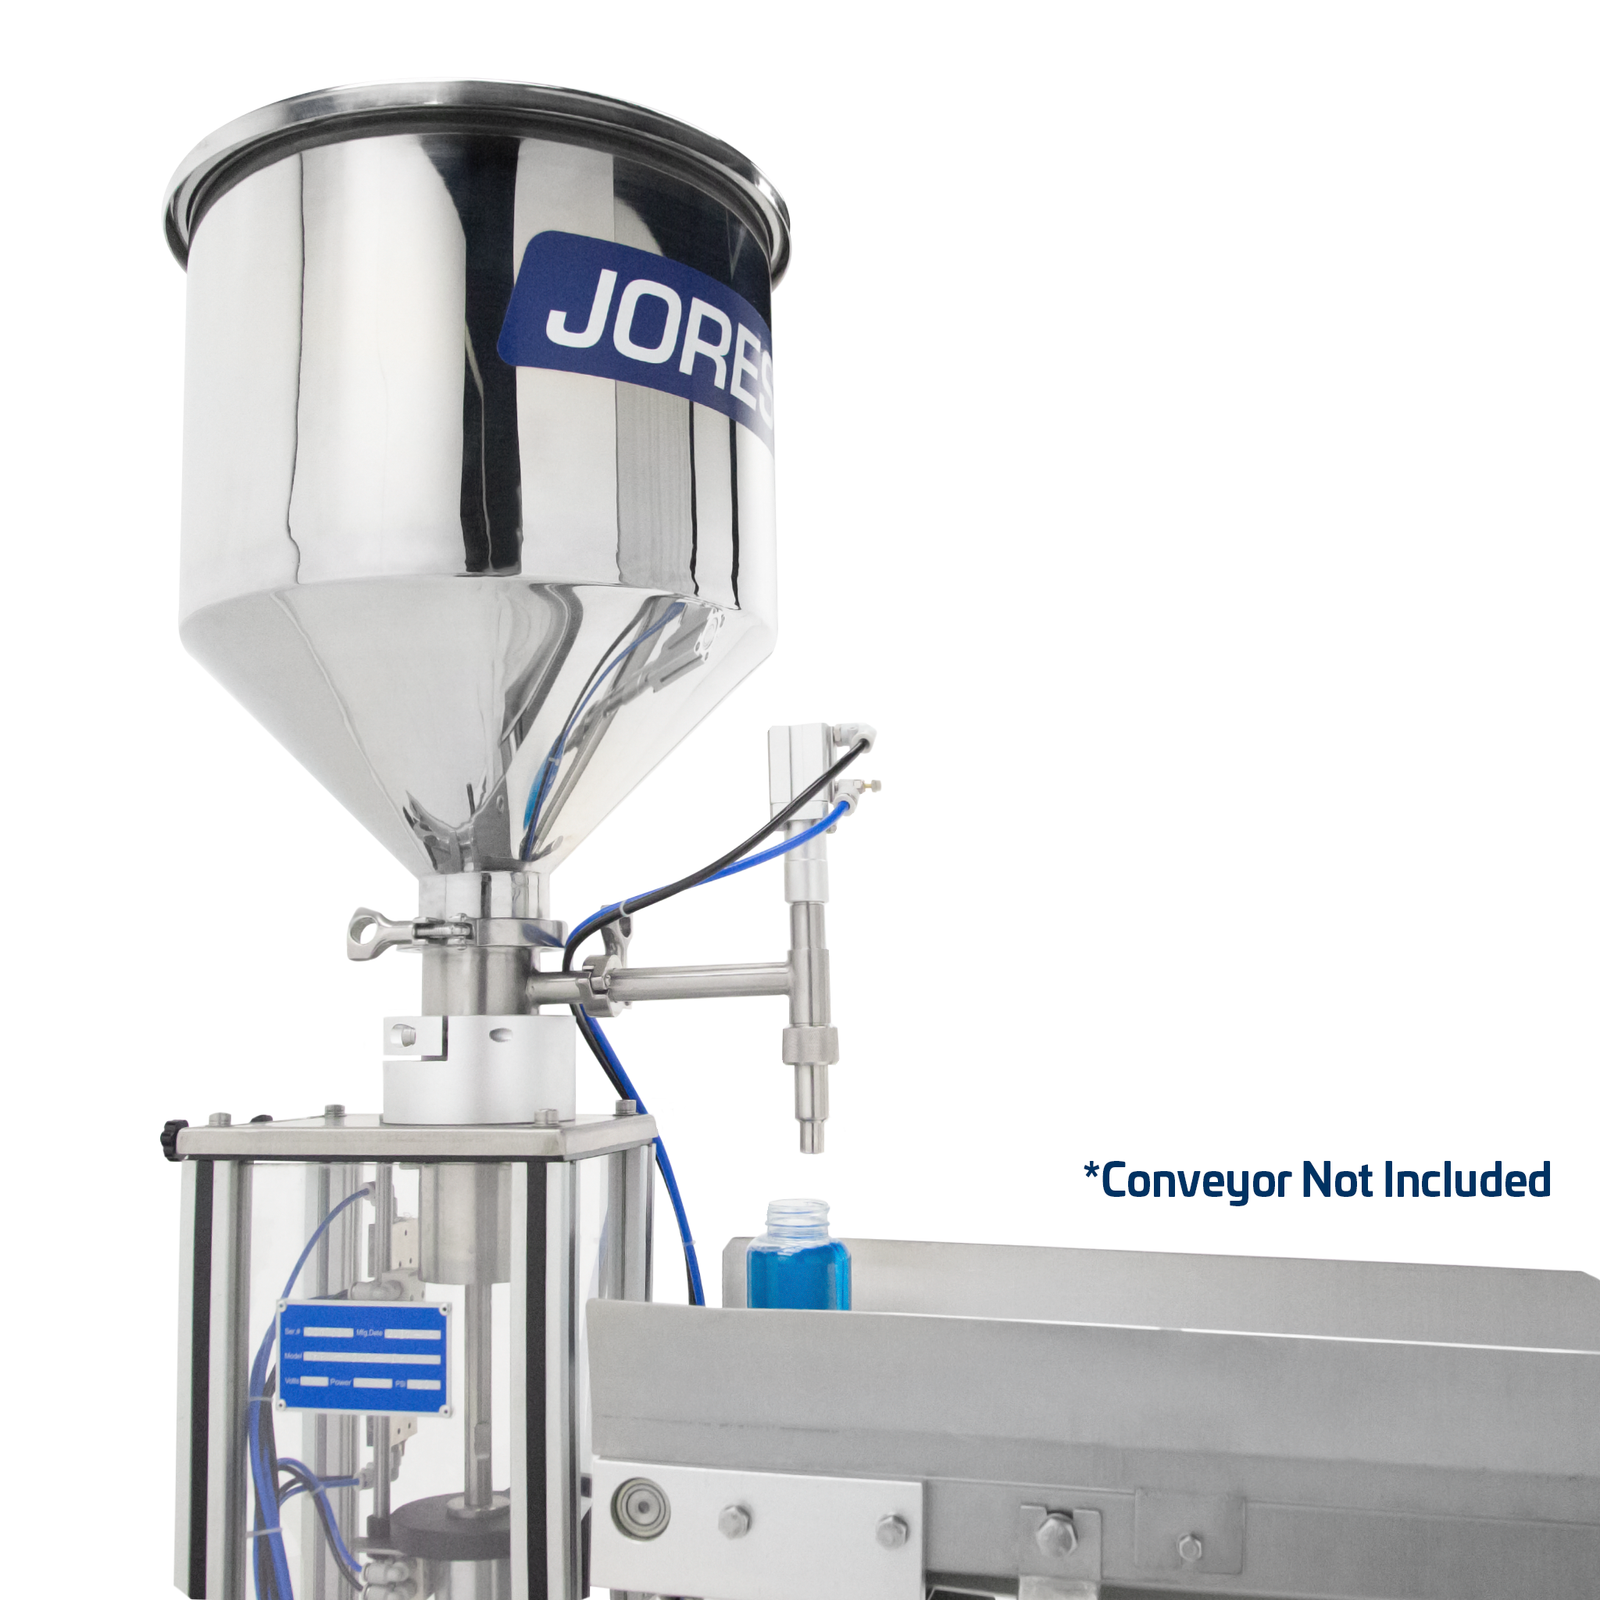 Closeup shows the high capacity hopper with lid and non-drip nozzle of the vertical piston filler next to a conveyor that has a clear bottle and has been filled with blue high viscosity gel by the piston filler